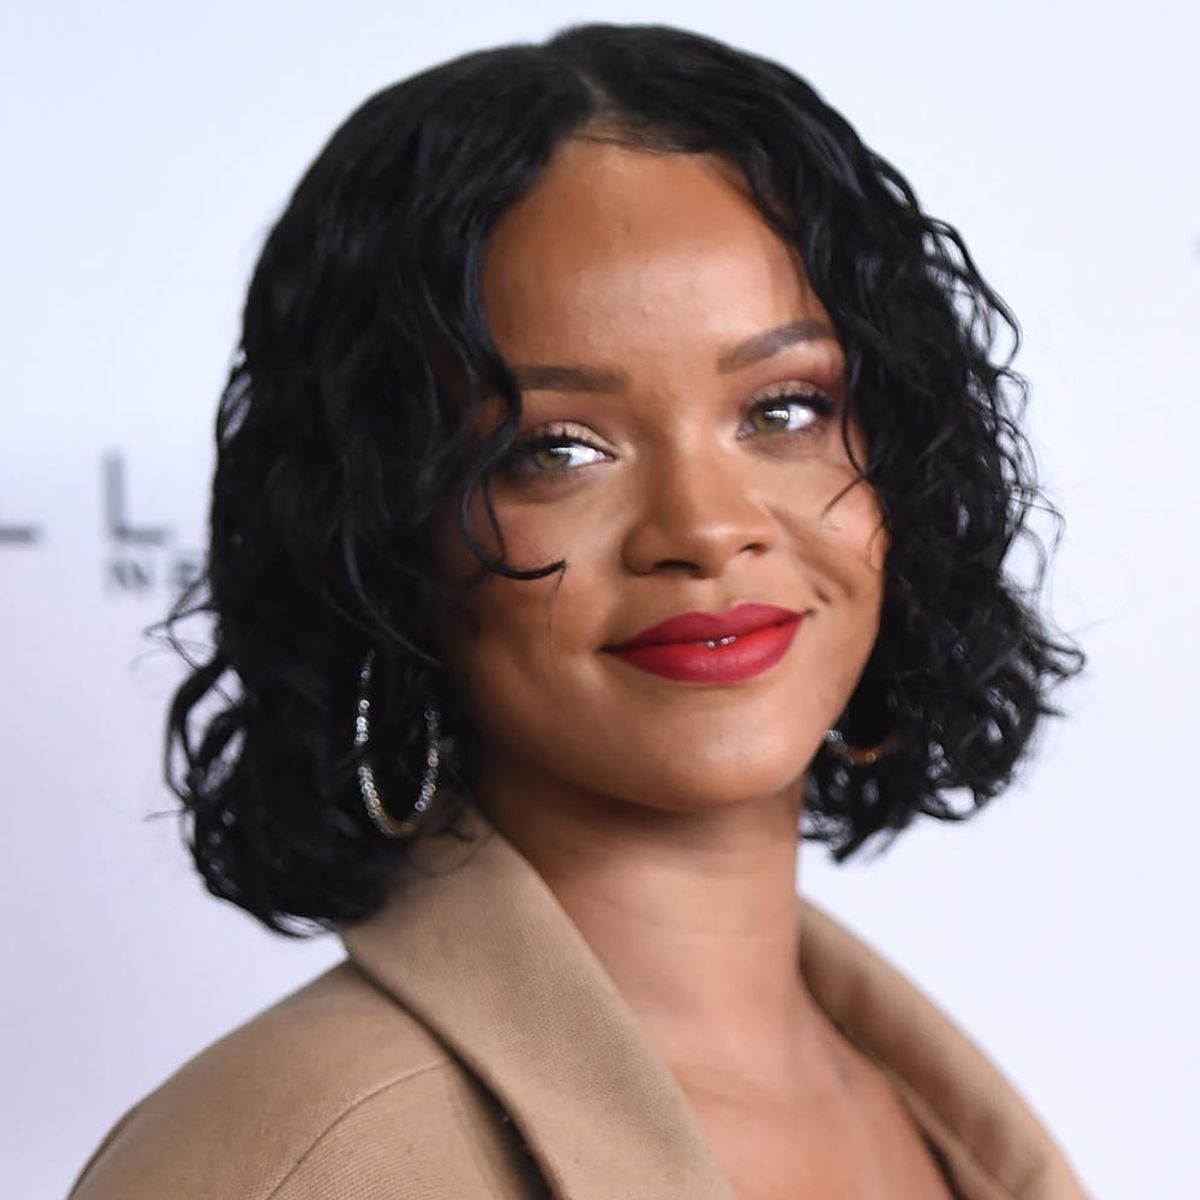 Why Everybody Needs to Stop Talking About Rihanna’s Weight, Period